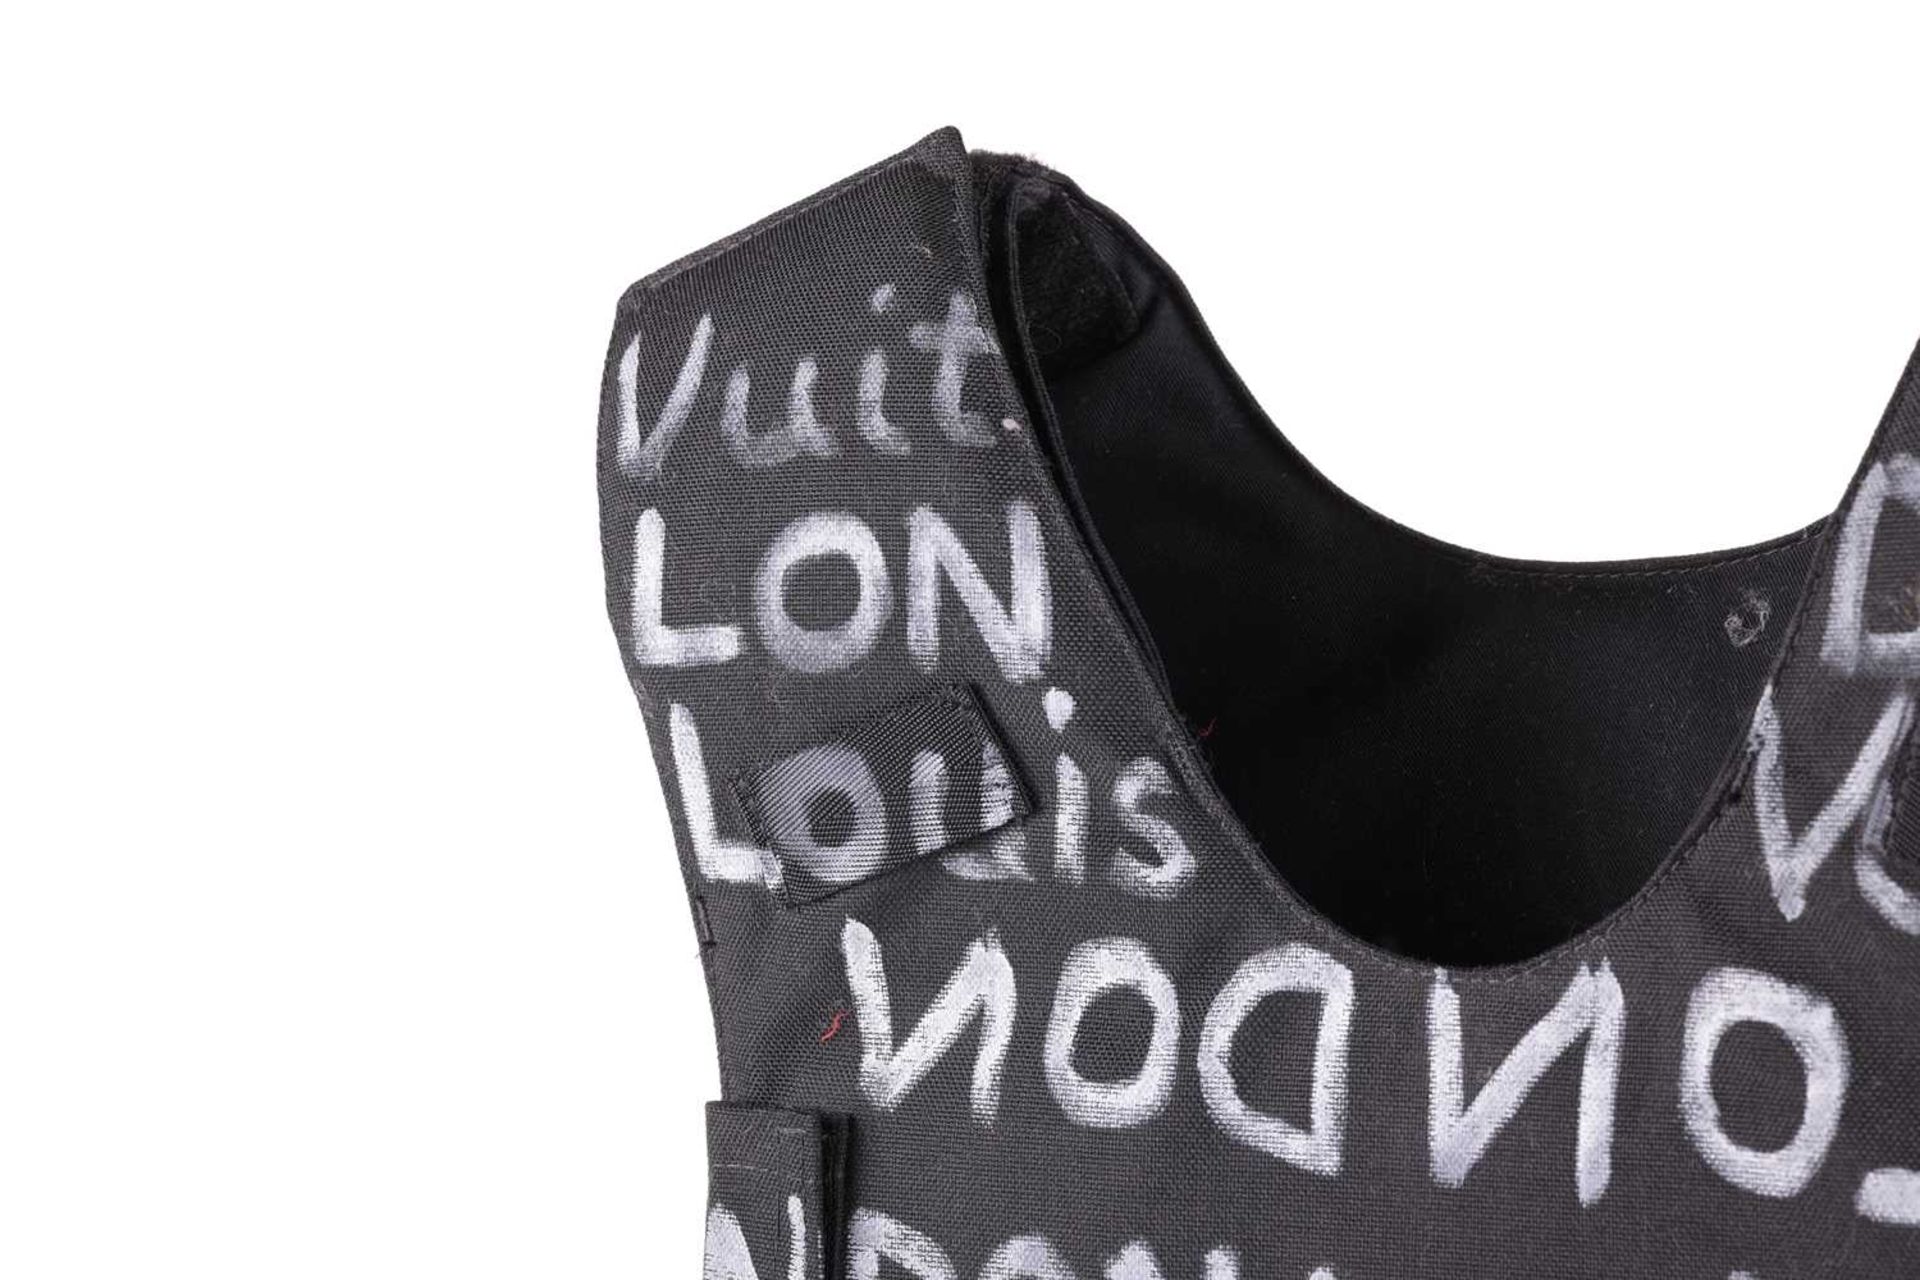 War Boutique (b. 1965), 'Louis Vuitton London', initialled, dated '19 and numbered 1/1 on interior - Image 3 of 9